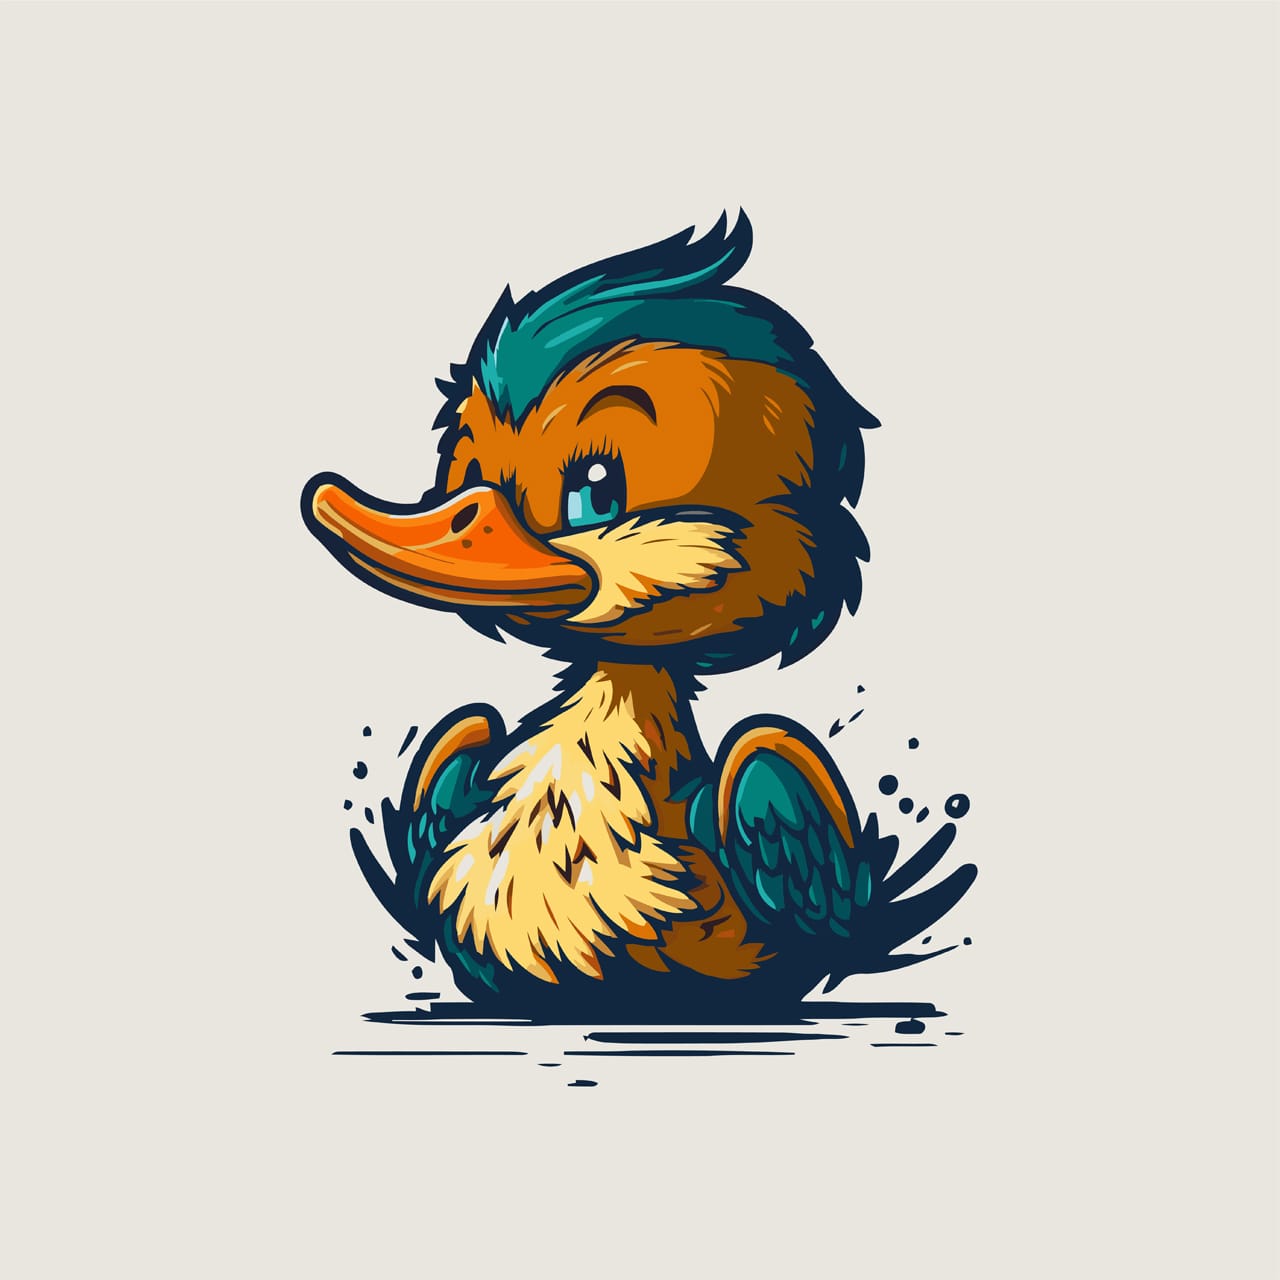 Avatar clipart cool duck goose character logo mascot icon branding